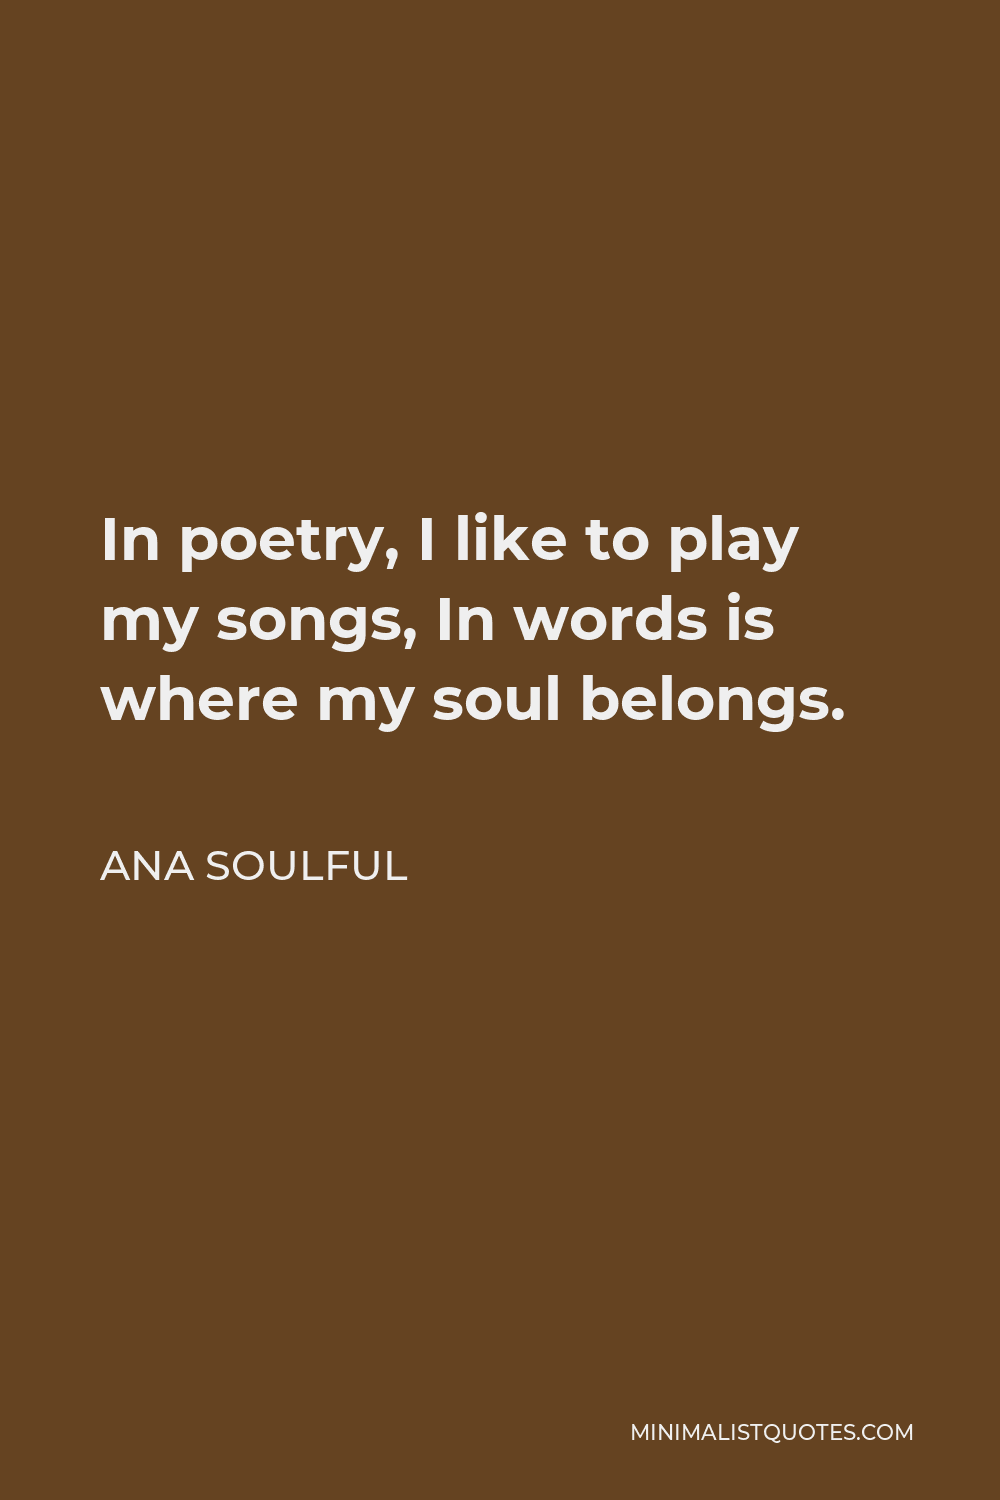 Ana Soulful Quote - In poetry, I like to play my songs, In words is where my soul belongs.